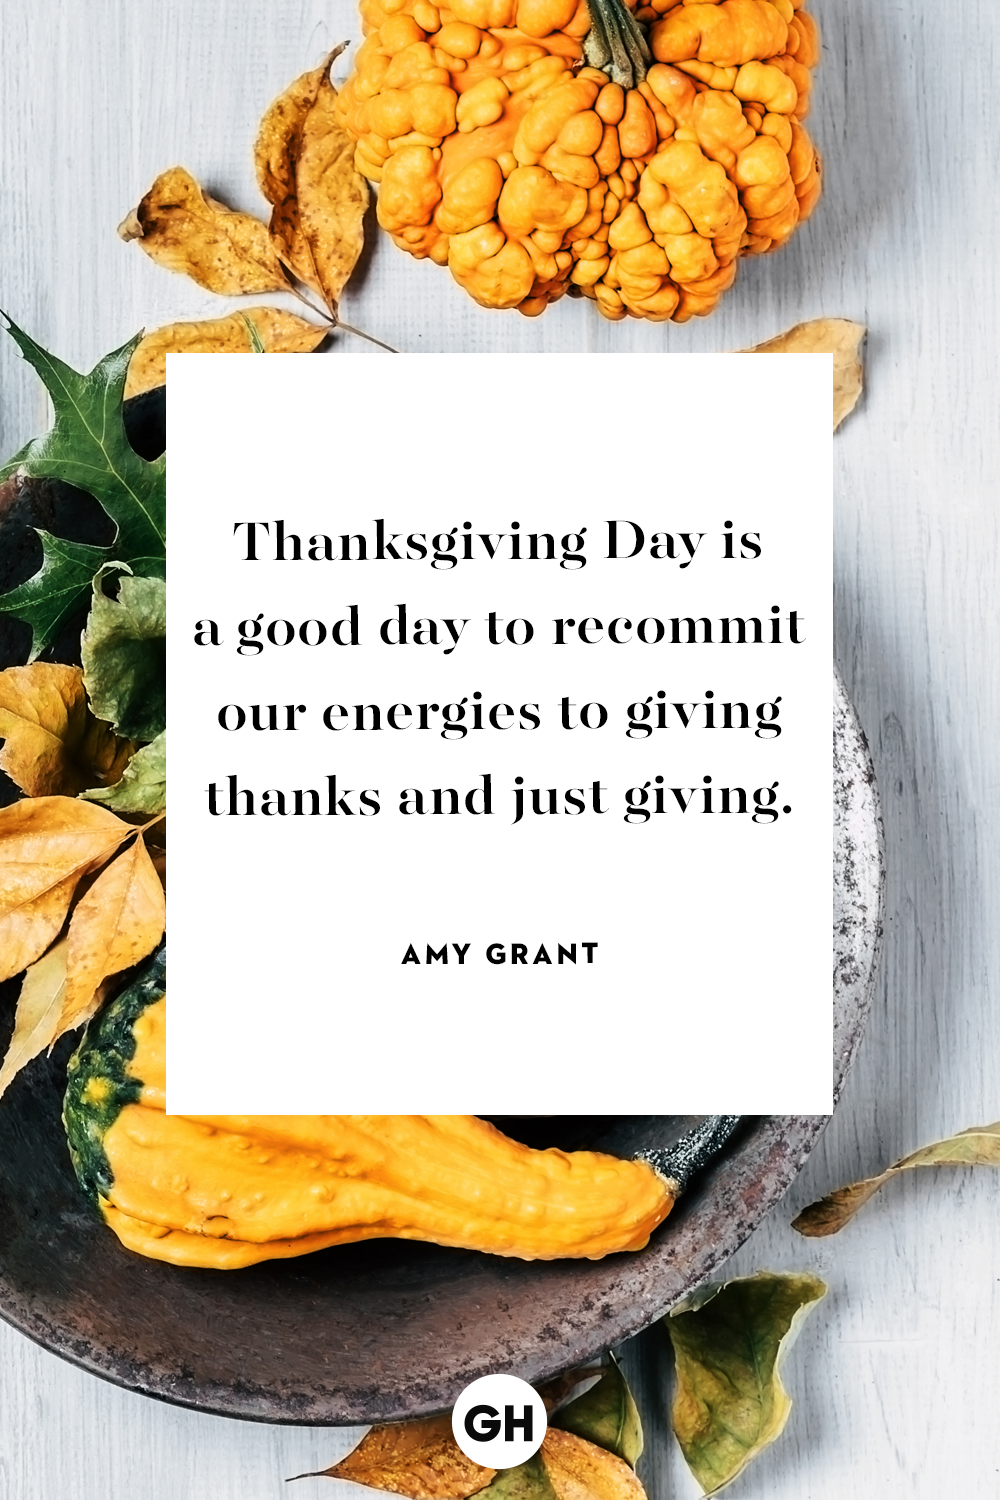 85 Best Thanksgiving Quotes - Gratitude Sayings to Show Thanks